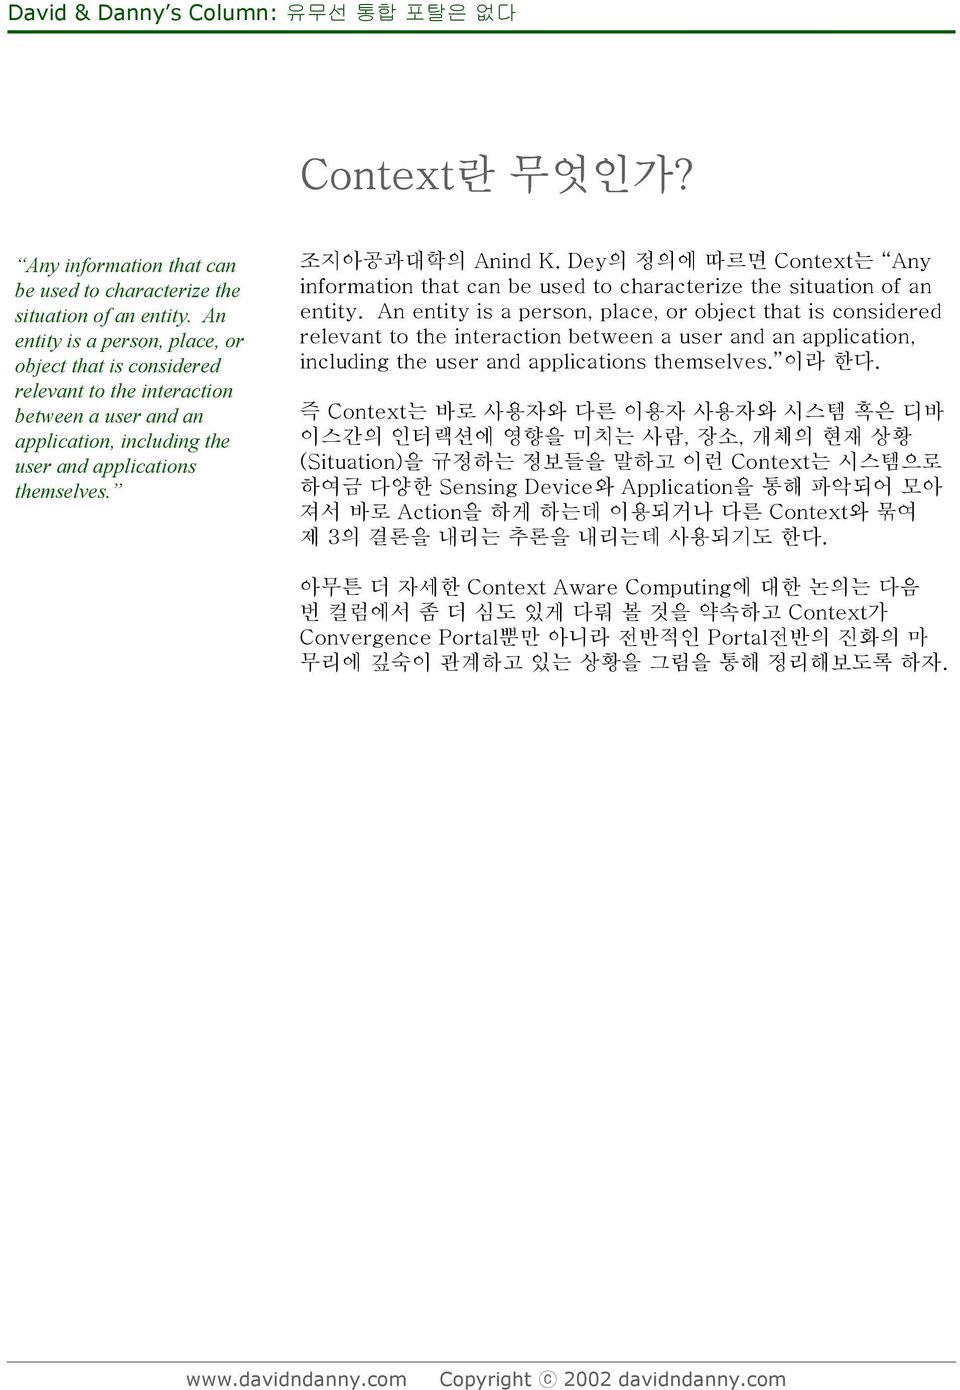 Dey의 정의에 따르면 Context는 Any information that can be used to characterize the situation of an entity.